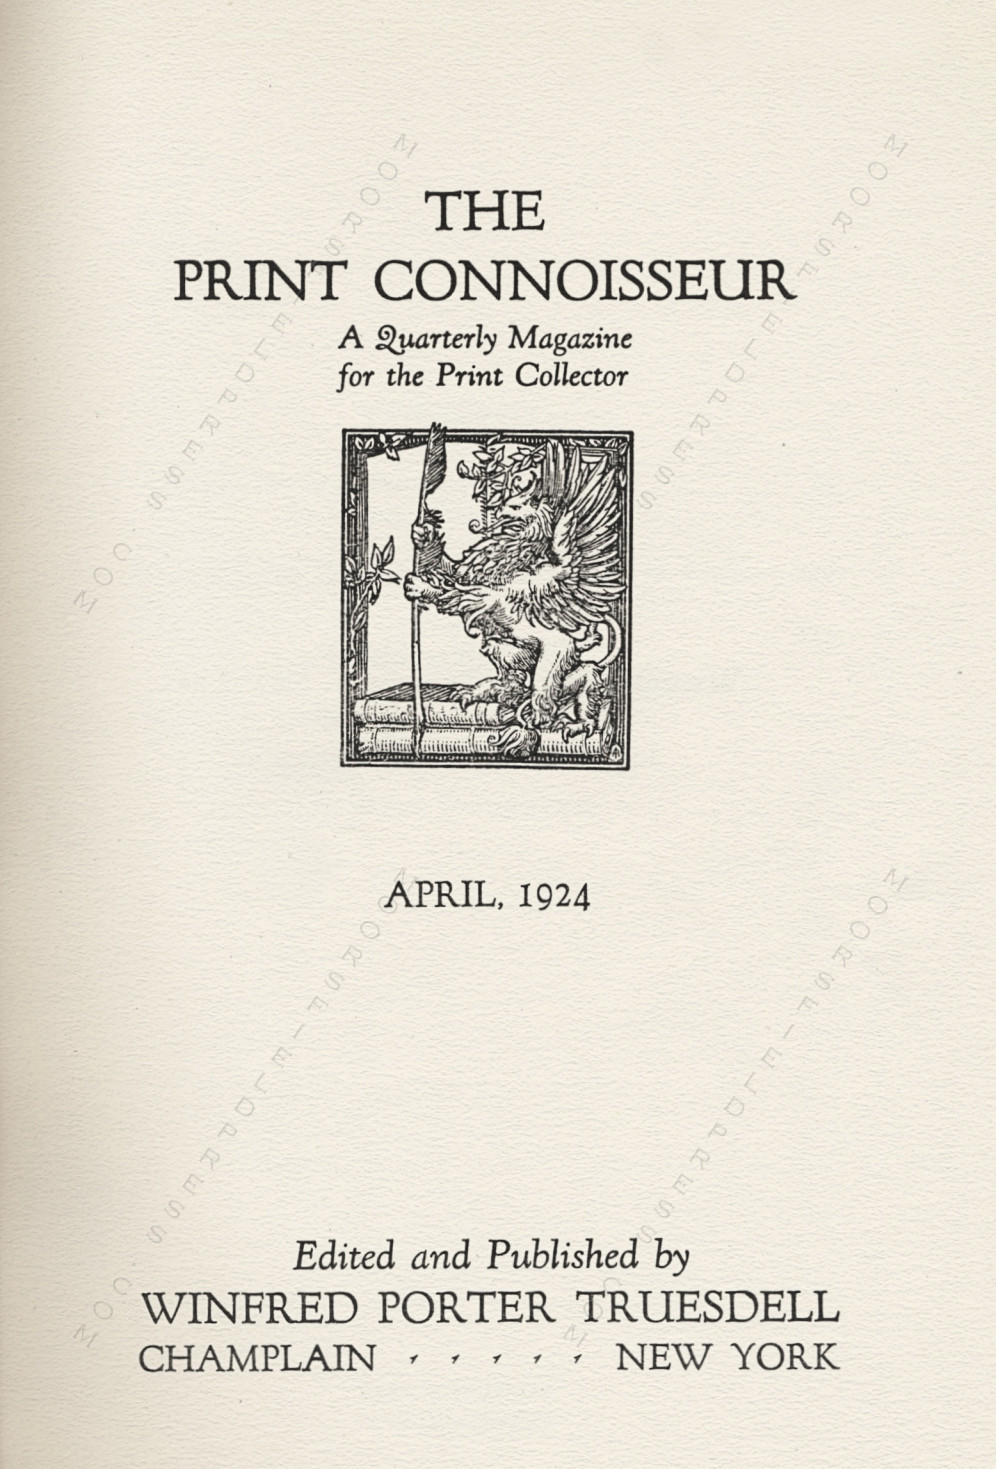 the_print_connoisseur_printed_by_the_moorsfield_press_april_1924